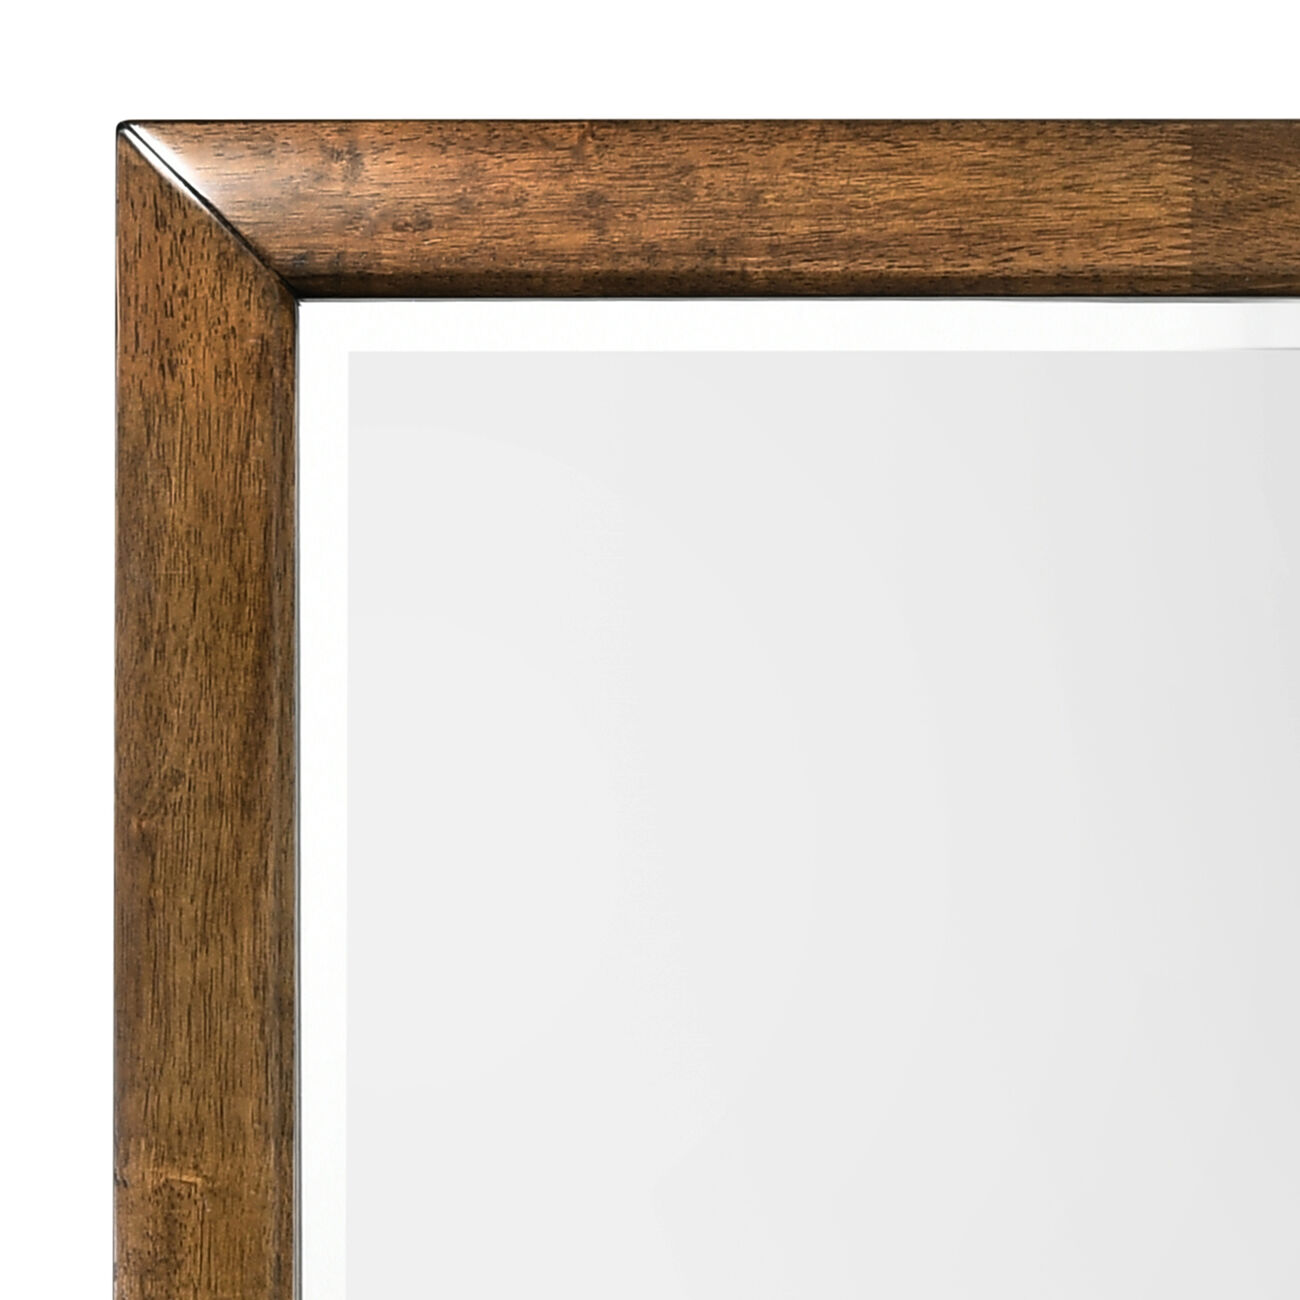 Transitional Style Wooden Decorative Mirror with Beveled Edge, Brown